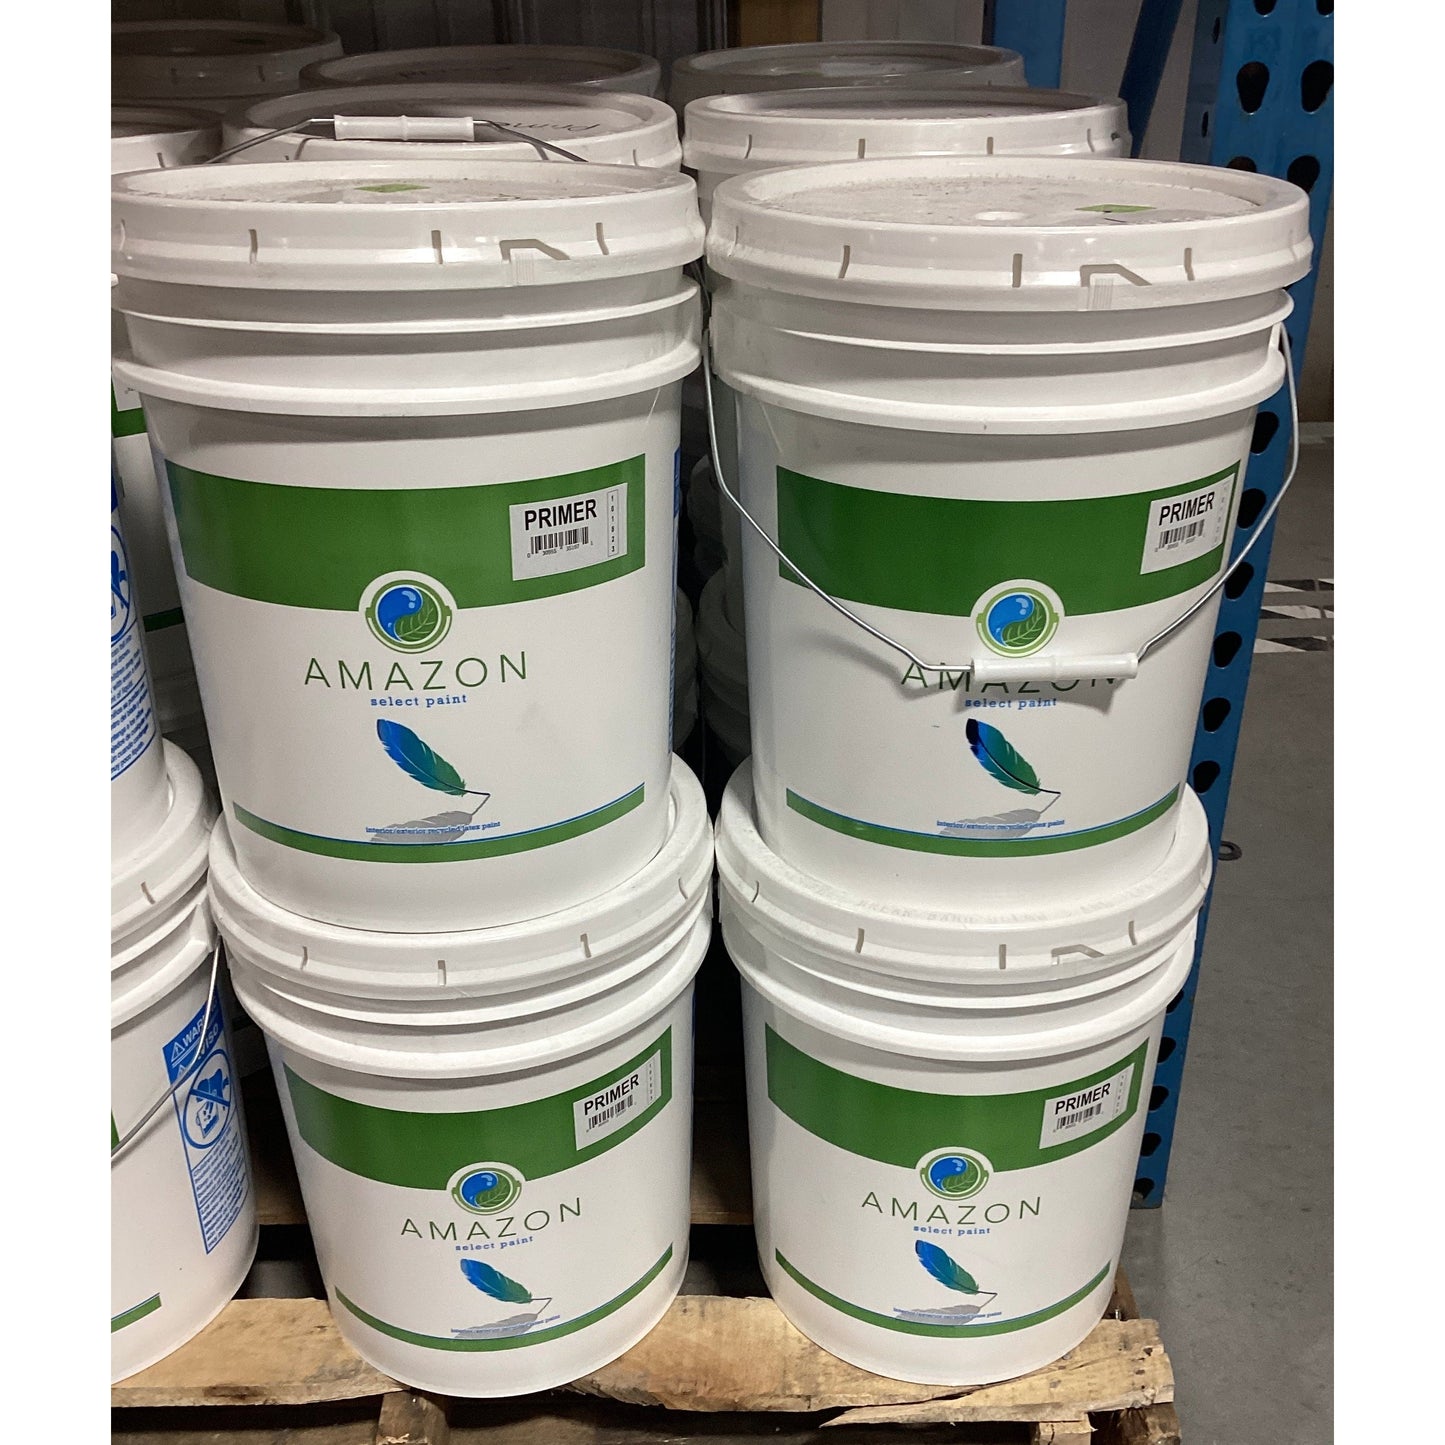 5 Gallon Primer Amazon Paint displayed in store.